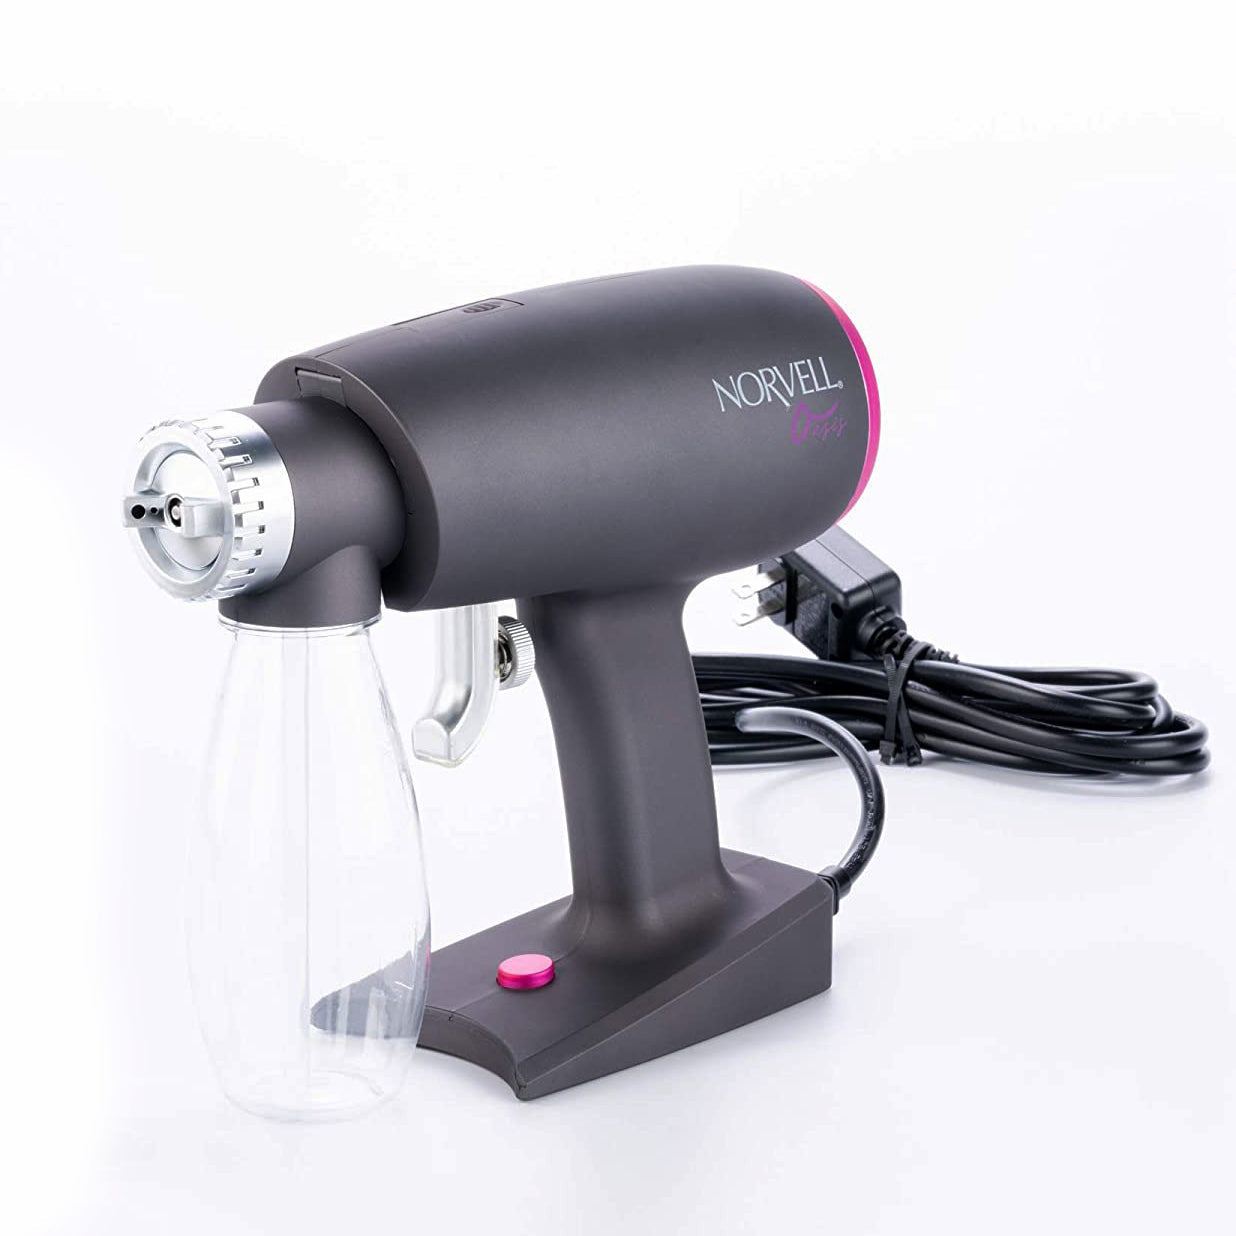 Norvell Oasis Portable Spray Tanning Machine Tanning Oil & Lotion NORVELL 